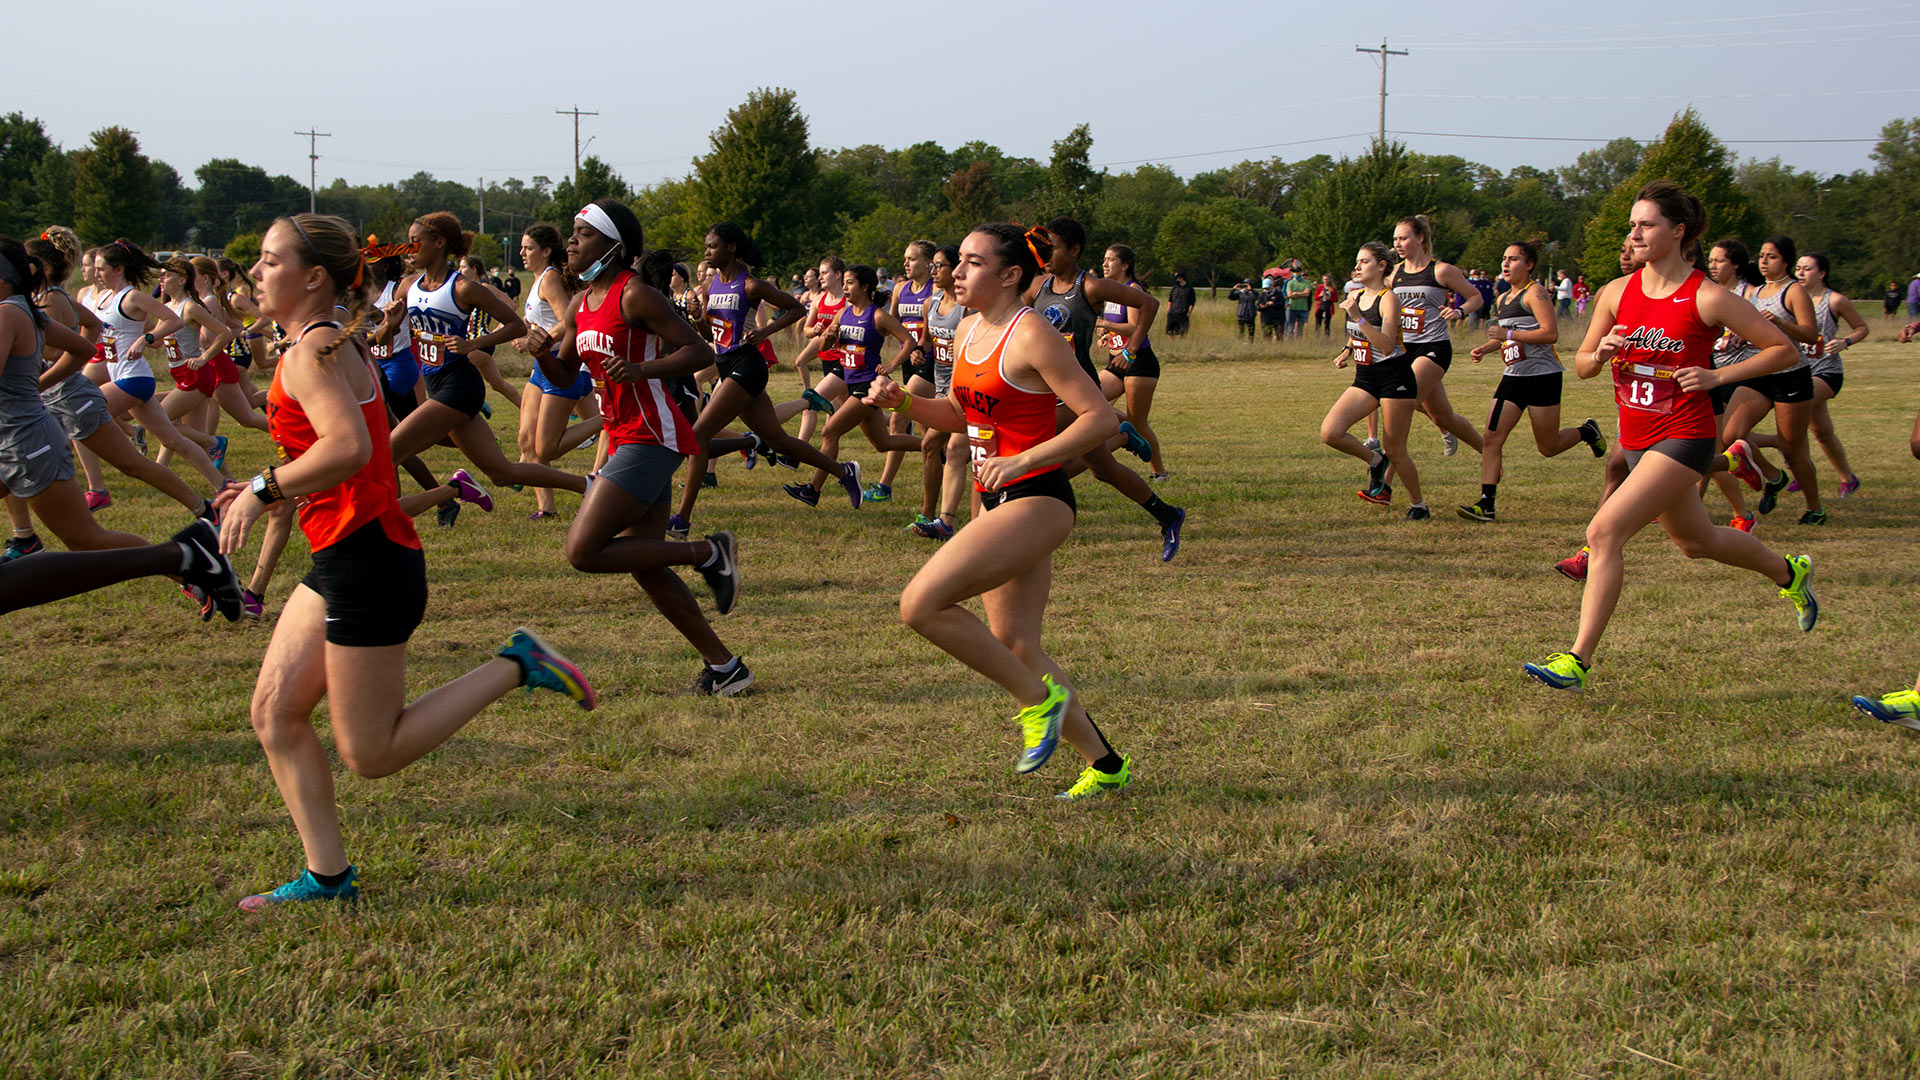 Personal best performances all around for Lady Tiger cross country team